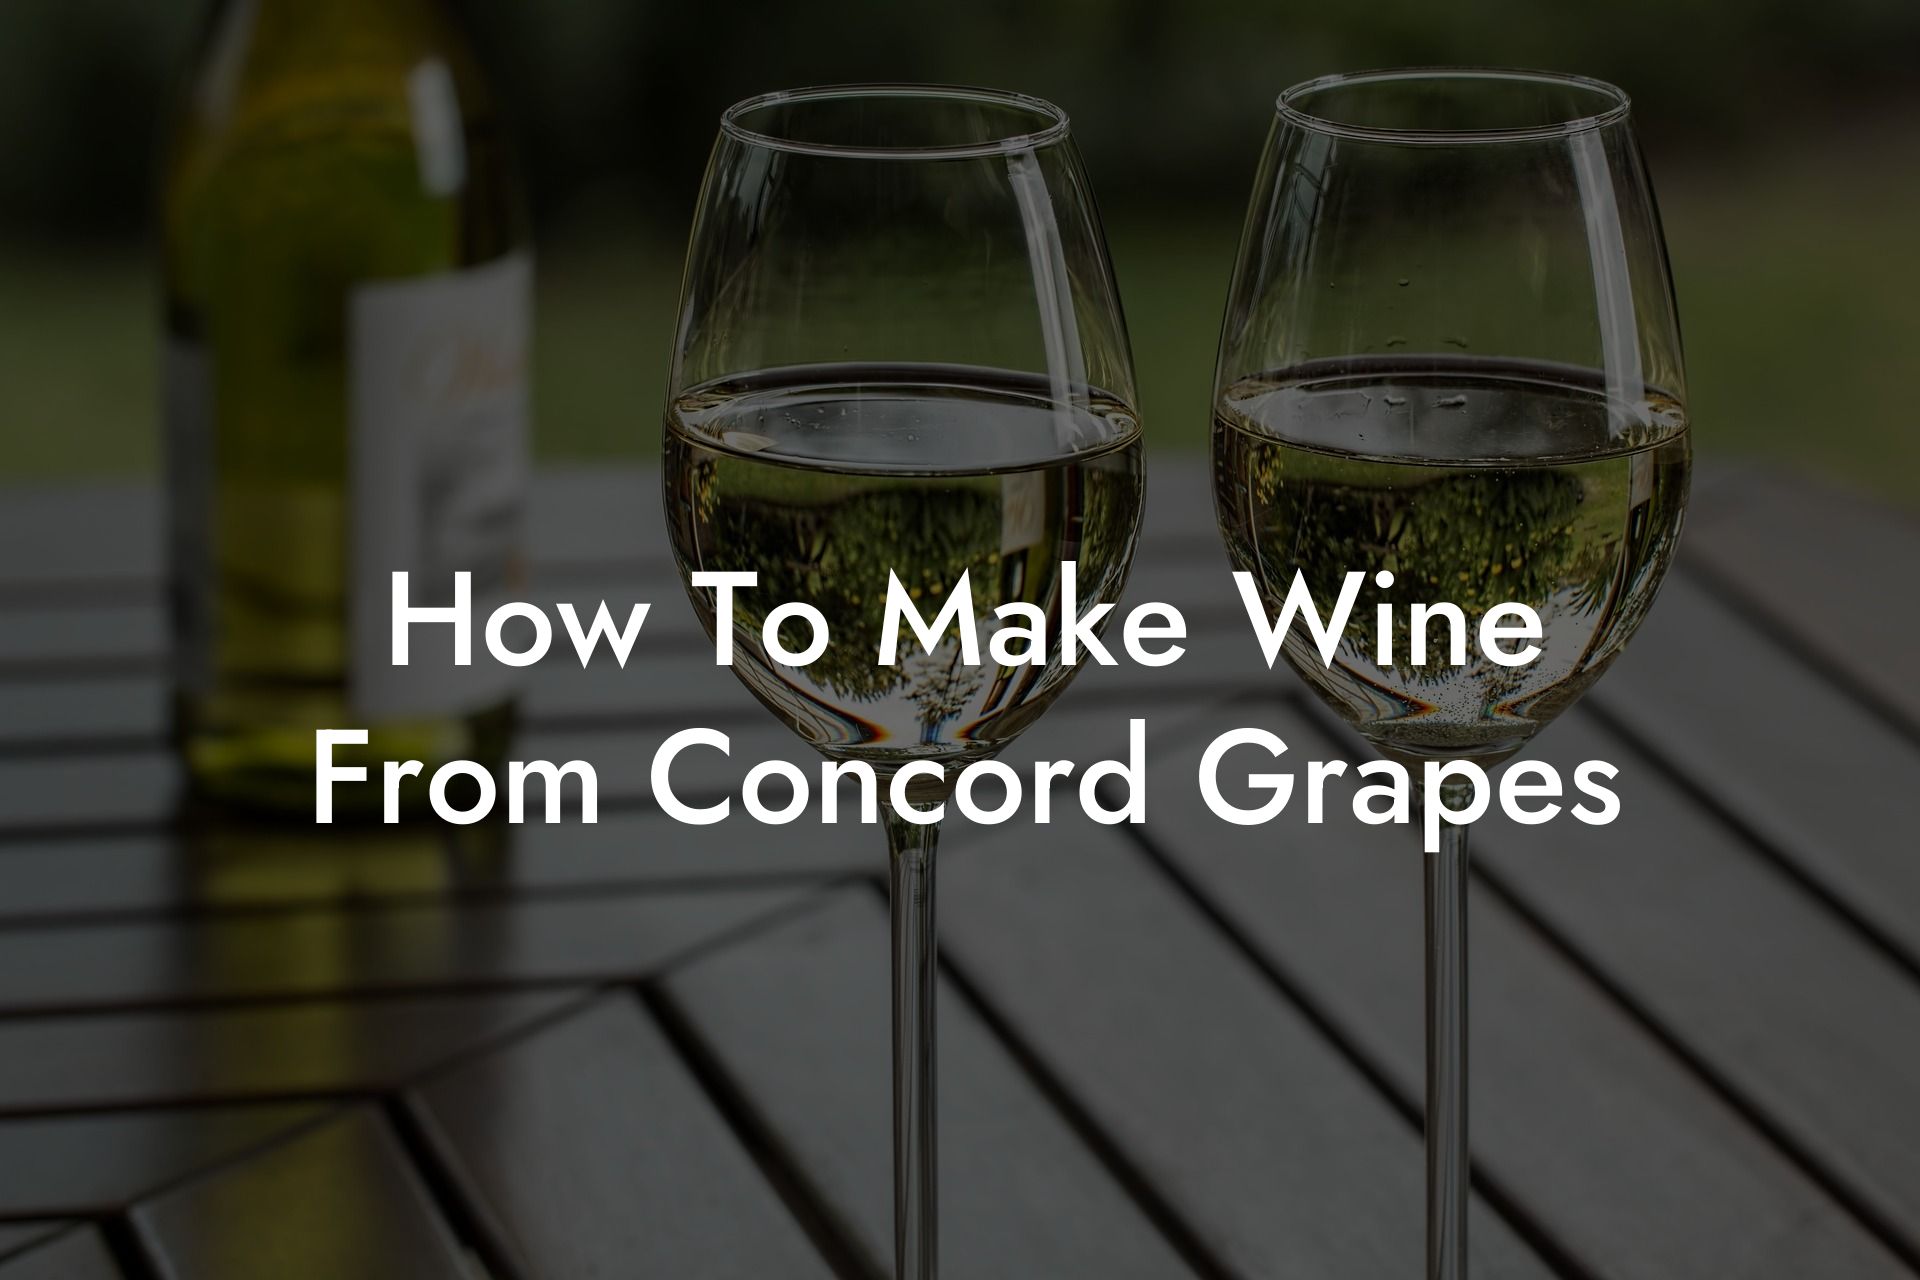 How To Make Wine From Concord Grapes